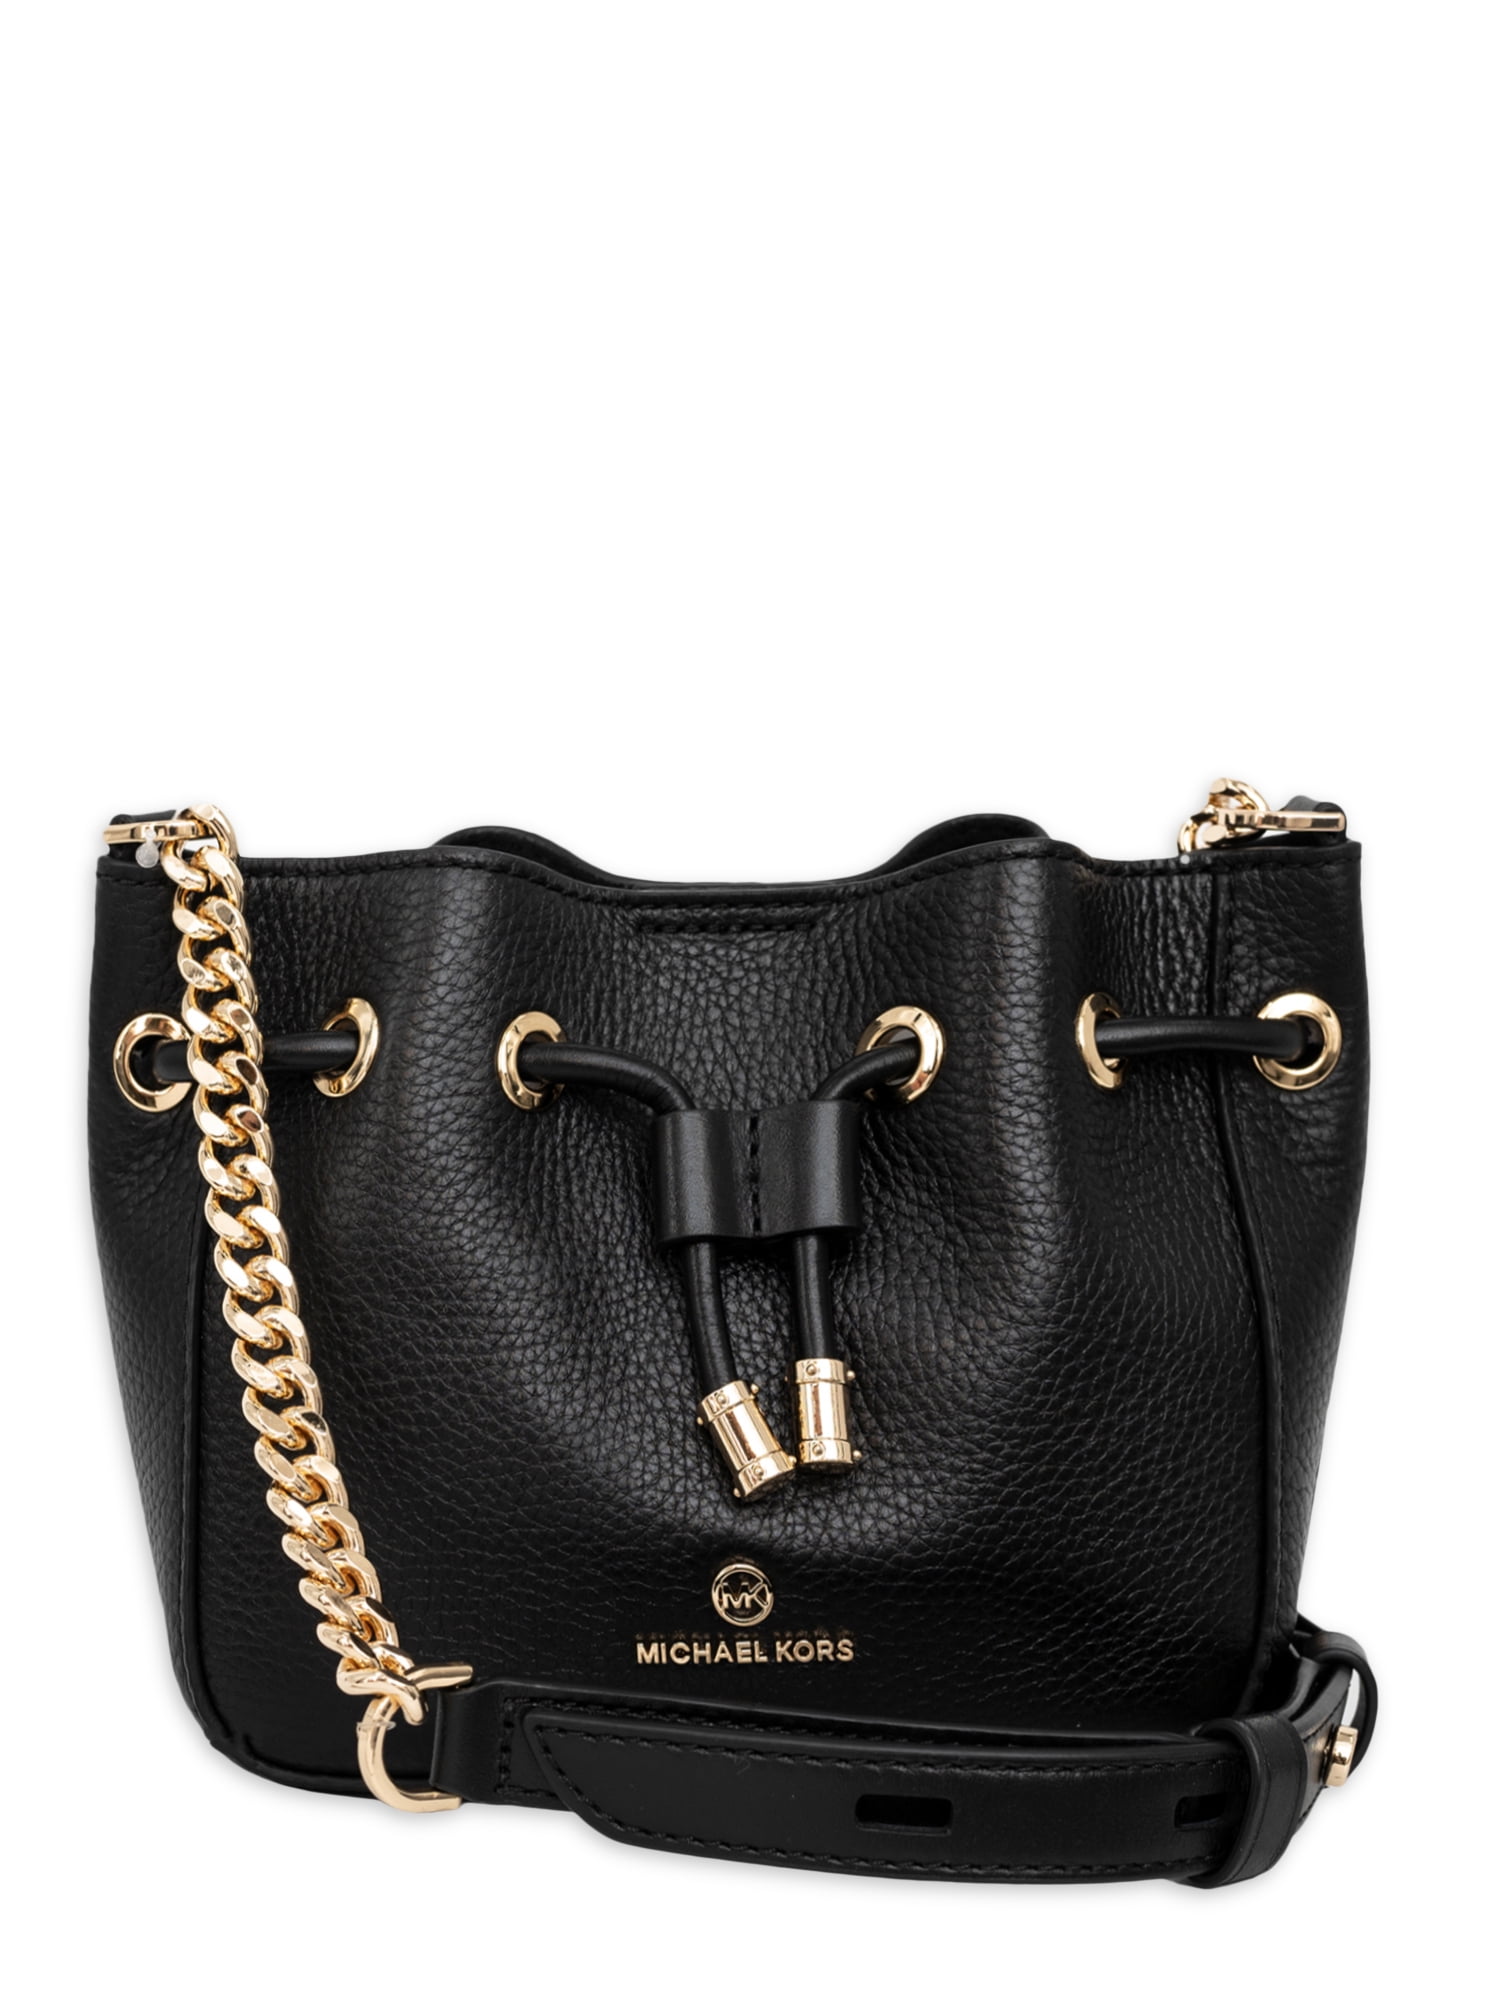 Buy Michael Kors Women's Extra-Small Pebbled Leather Crossbody Bag - Black  Online at Lowest Price in Ubuy Nepal. 1592382394